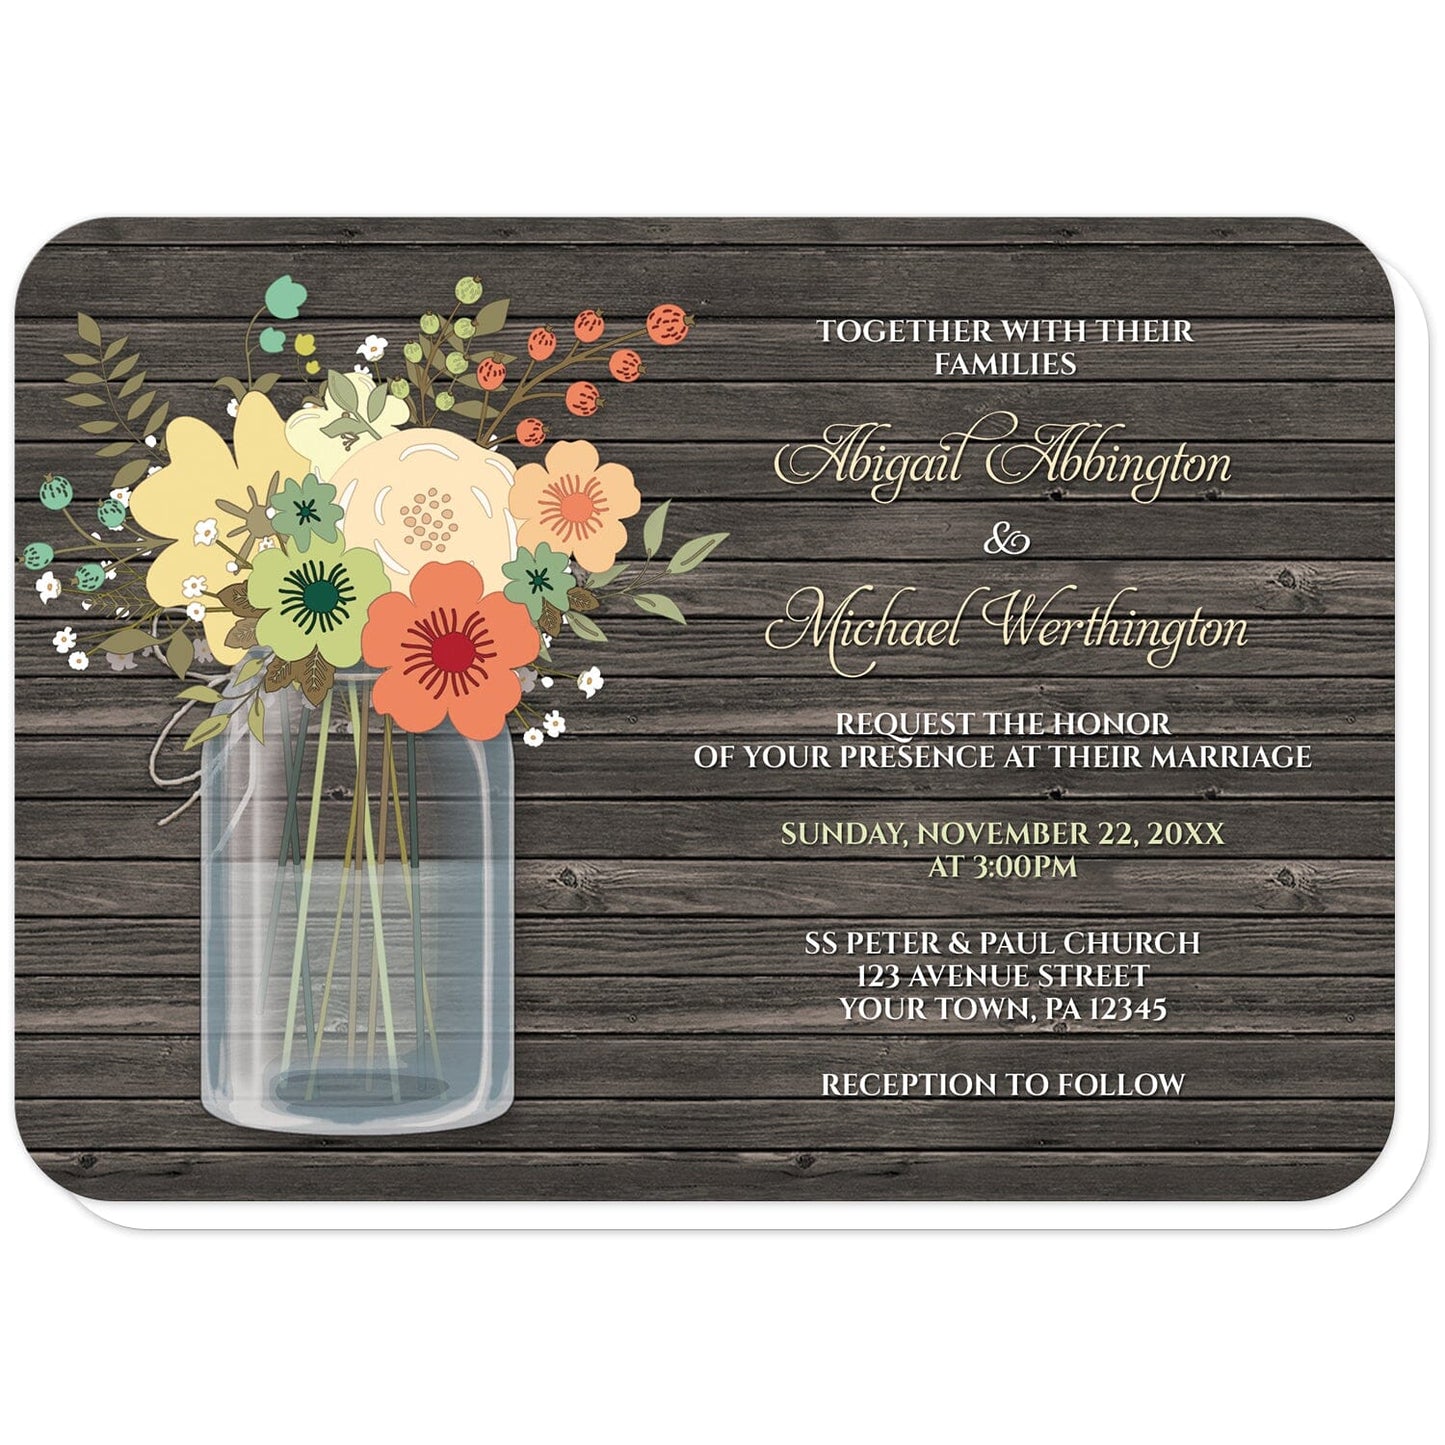 Rustic Floral Wood Mason Jar Wedding Invitations (with rounded corners) at Artistically Invited. Rustic floral wood mason jar wedding invitations with a pretty orange and teal floral mason jar theme with yellow, beige, and green accent flowers. Your personalized marriage celebration details are custom printed in beige, green, and white over a dark brown rustic wood pattern background next to the mason jar illustration, in both script and all-capital letters fonts.